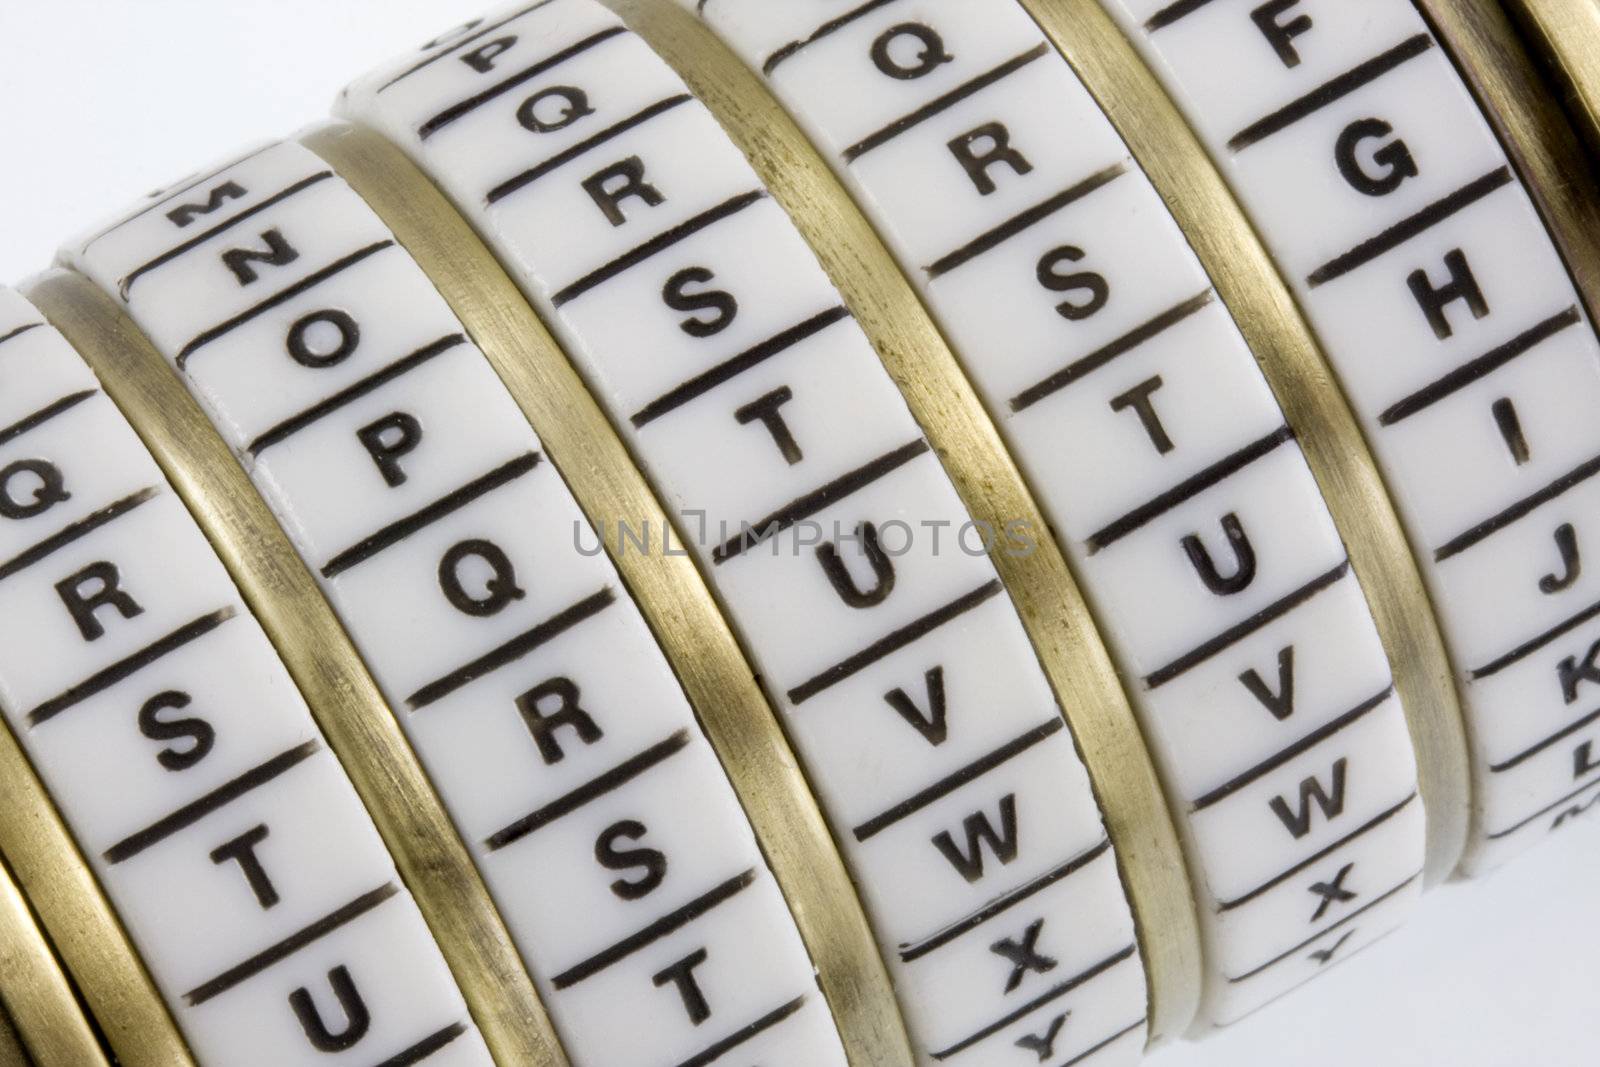 Word truth set as a secret keyword in a combination puzzle box with letter rings known as Cryptex